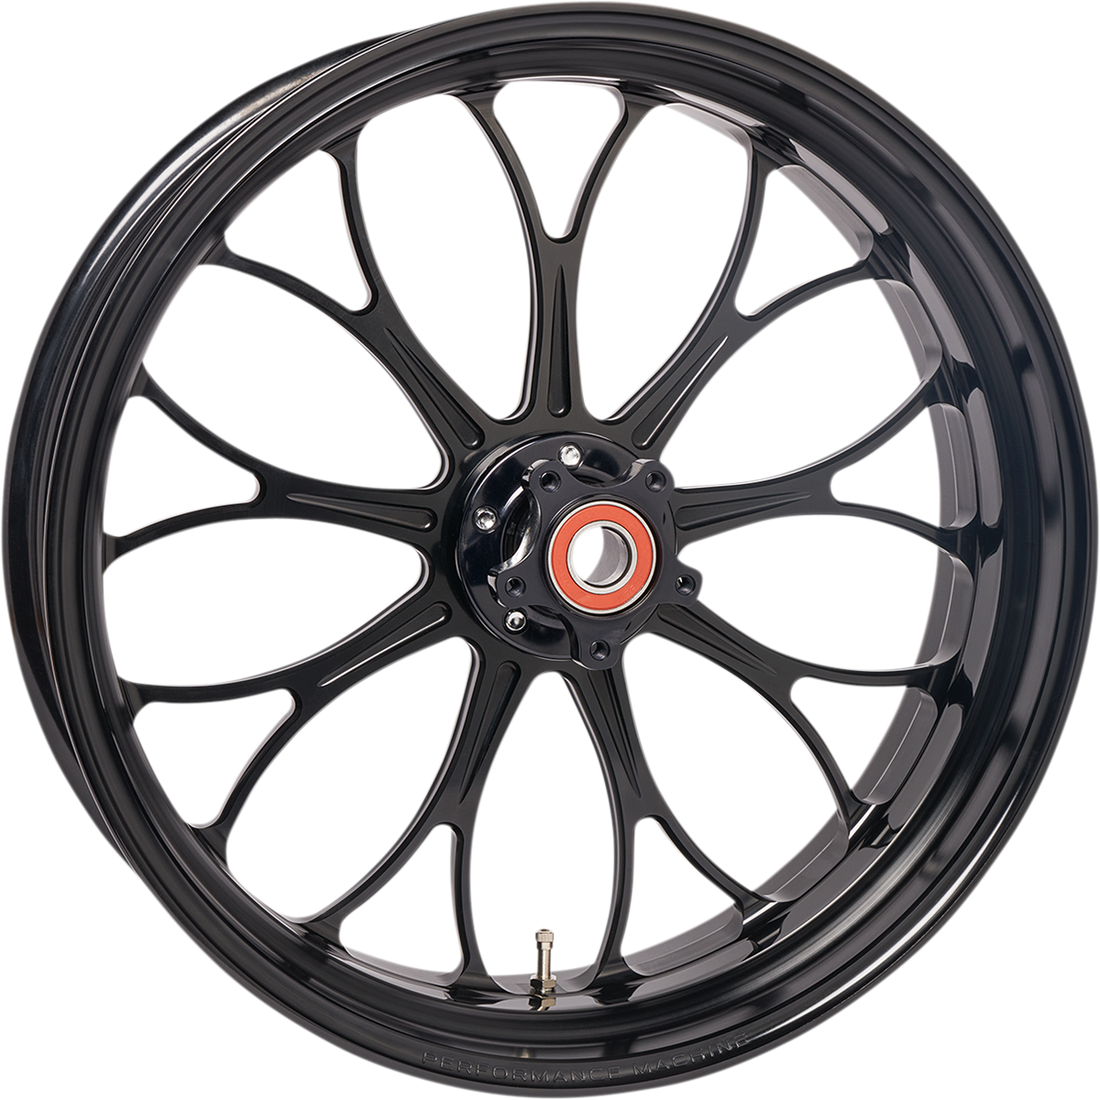 0201-2362 - PERFORMANCE MACHINE (PM) Wheel - Revolution - Dual Disc - Front - Black Ops* - 21"x3.50" - With ABS 12047106RVNJAPB